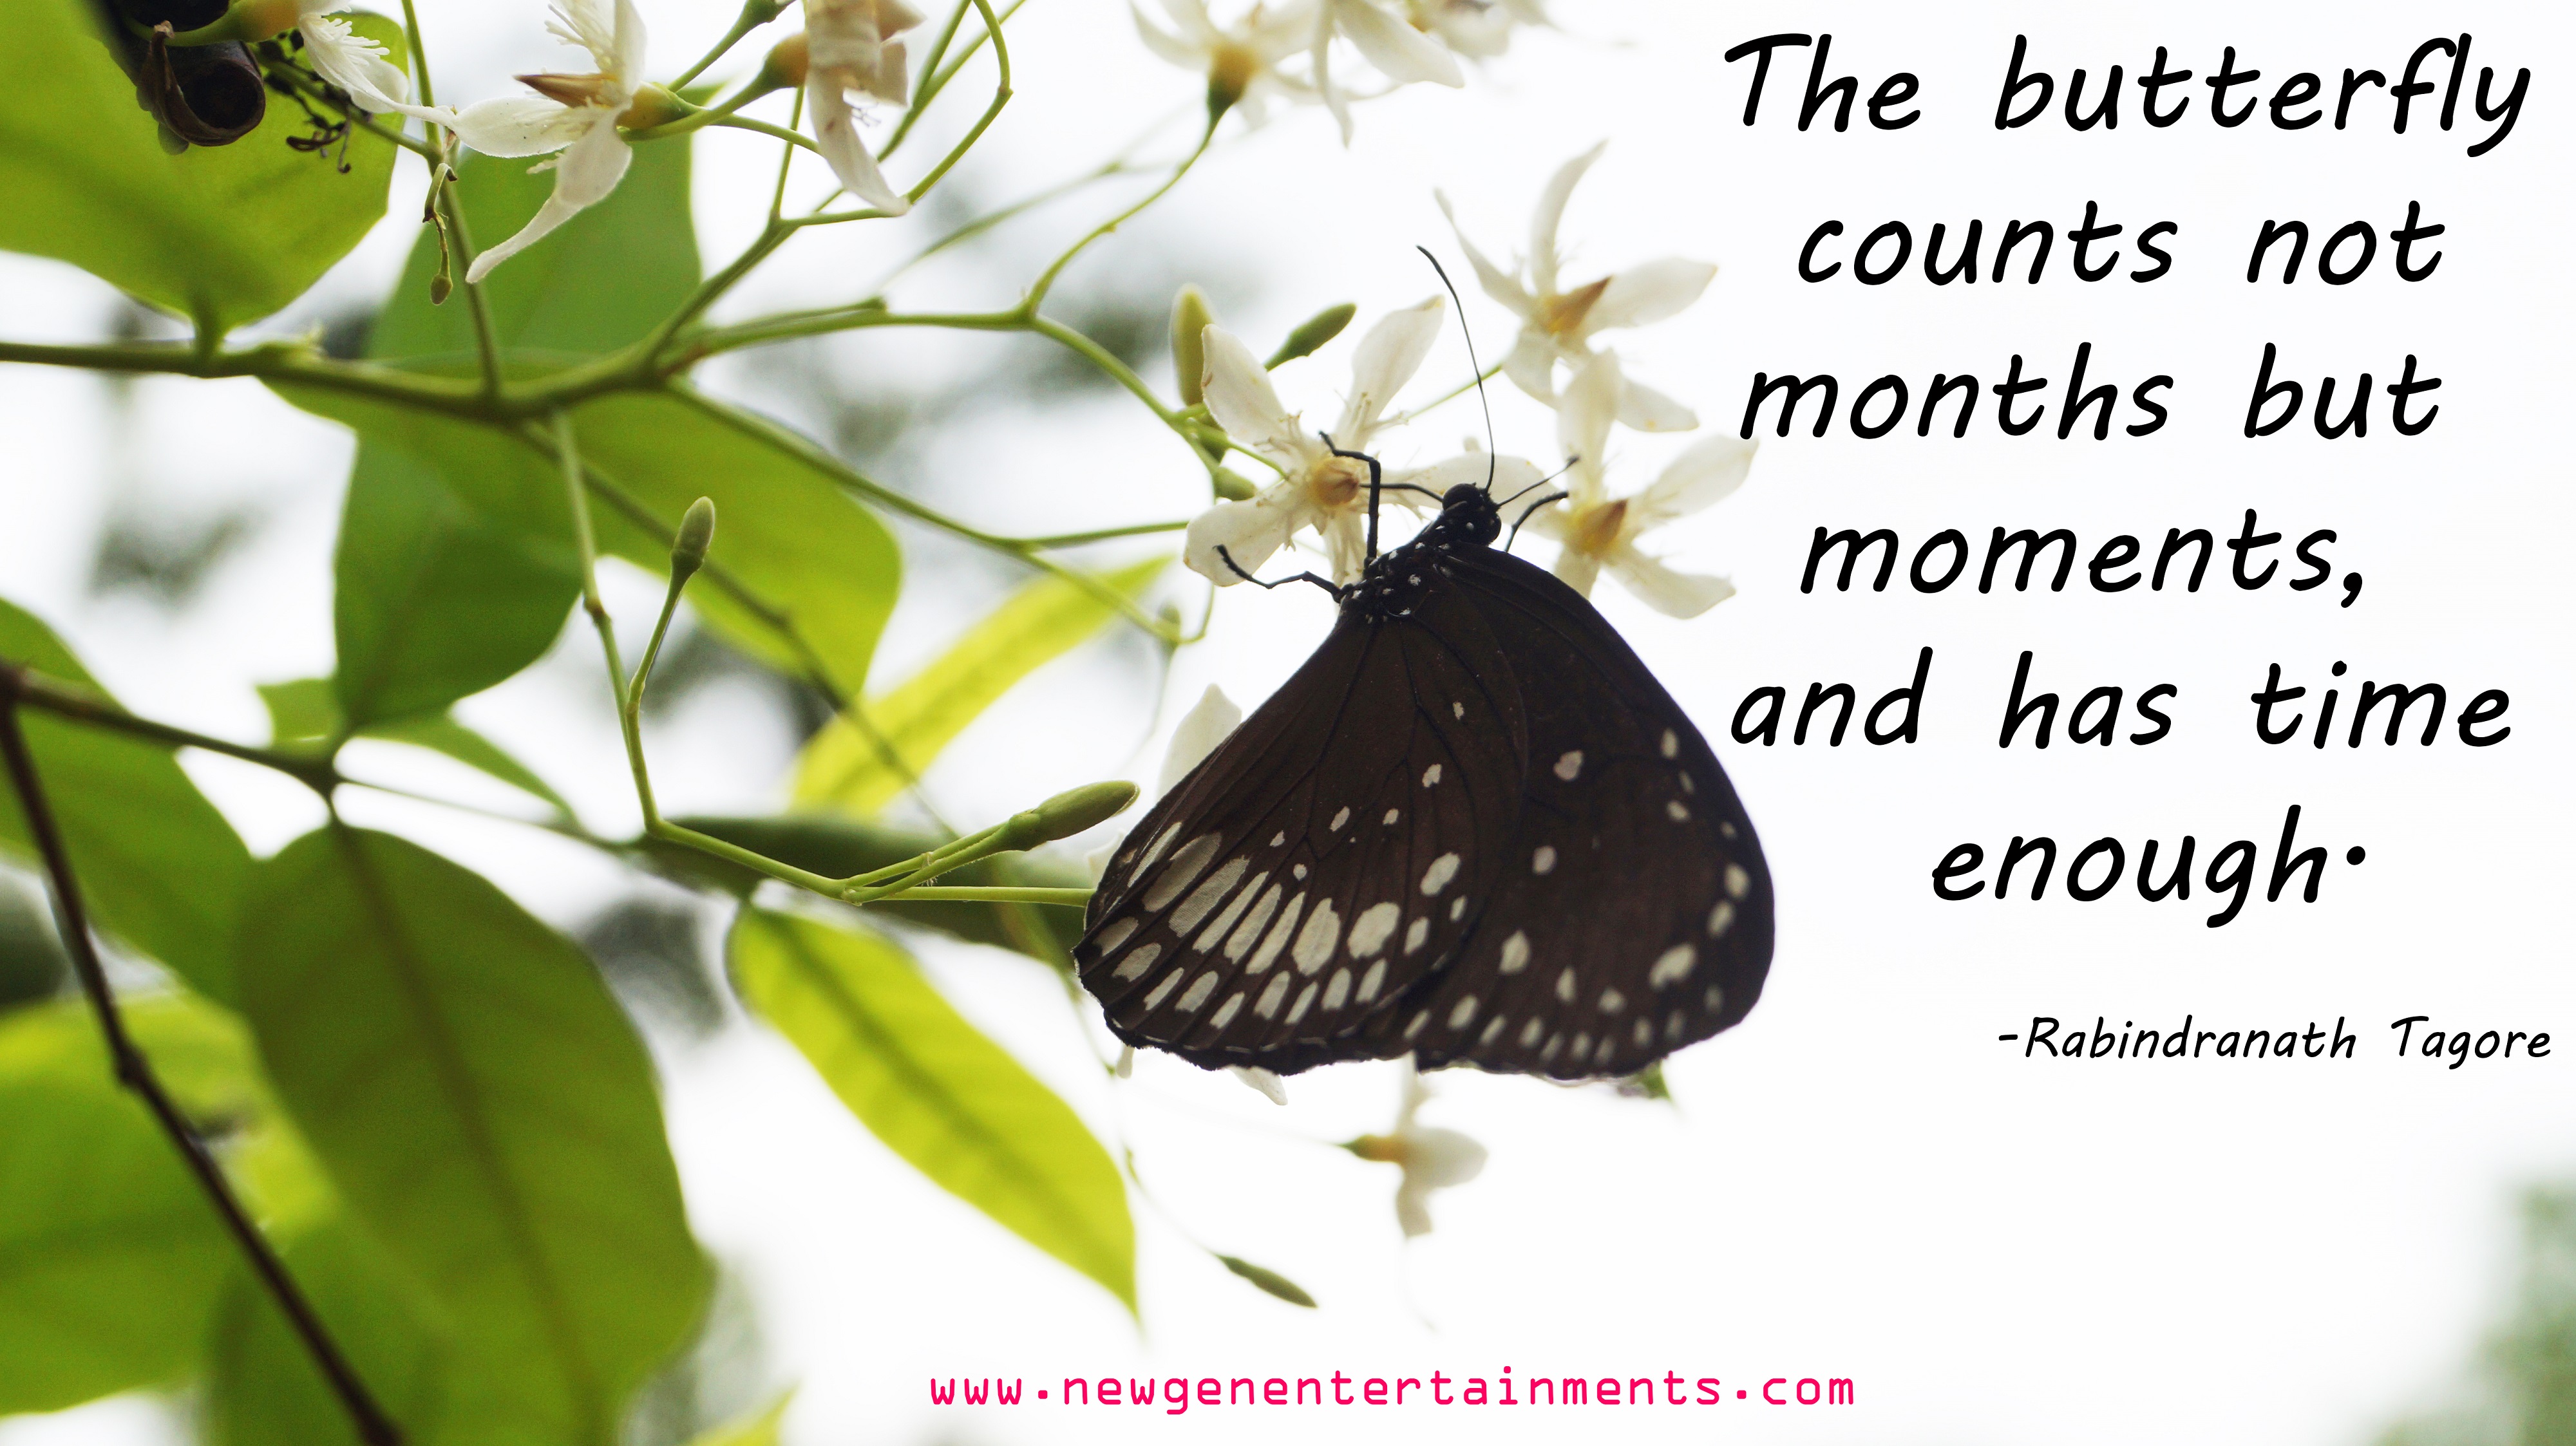 The butterfly counts not months but moments, and has time enough